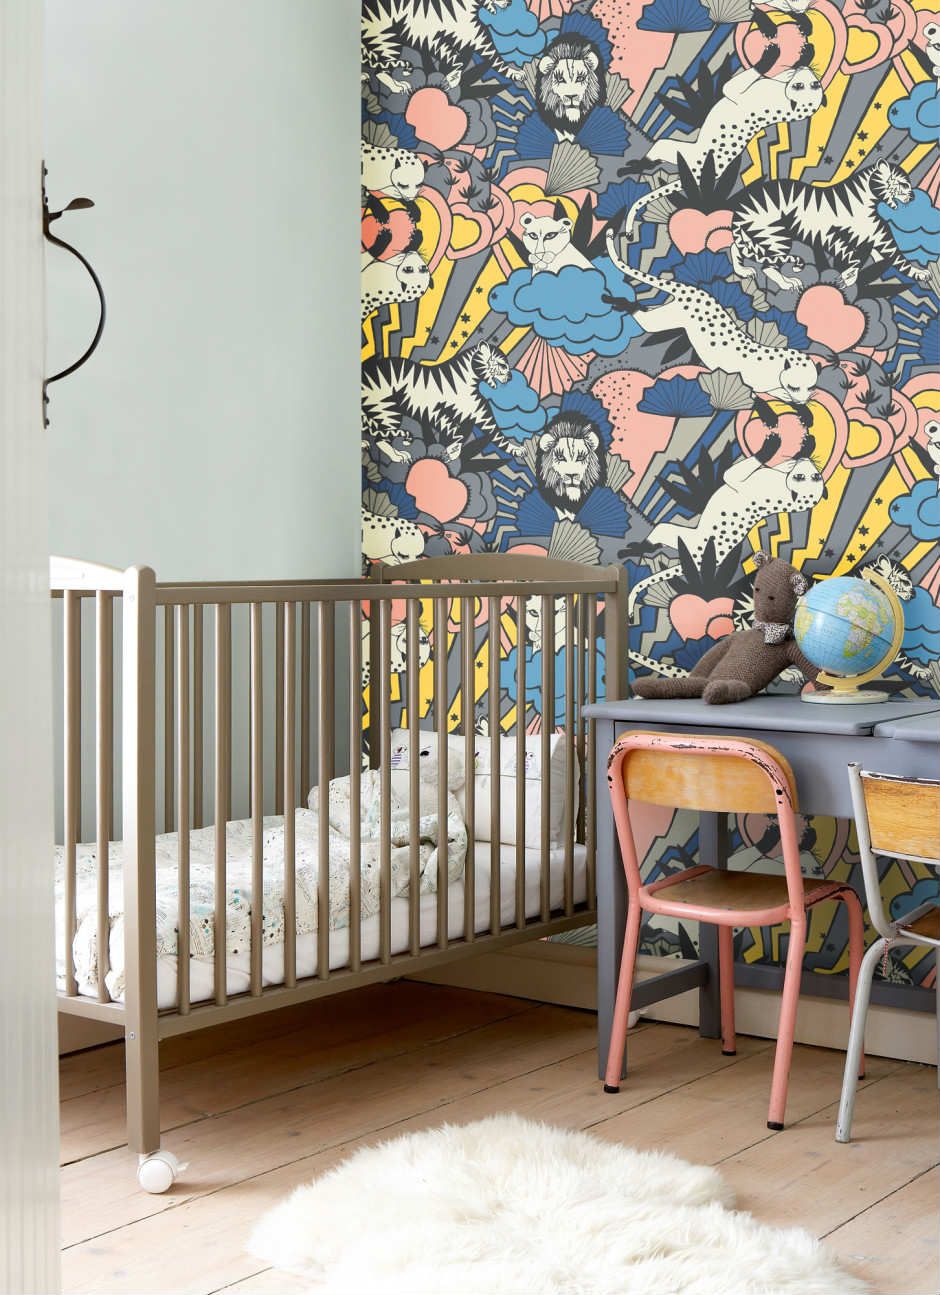 Quirky Wallpaper Designs Tinyme Kids